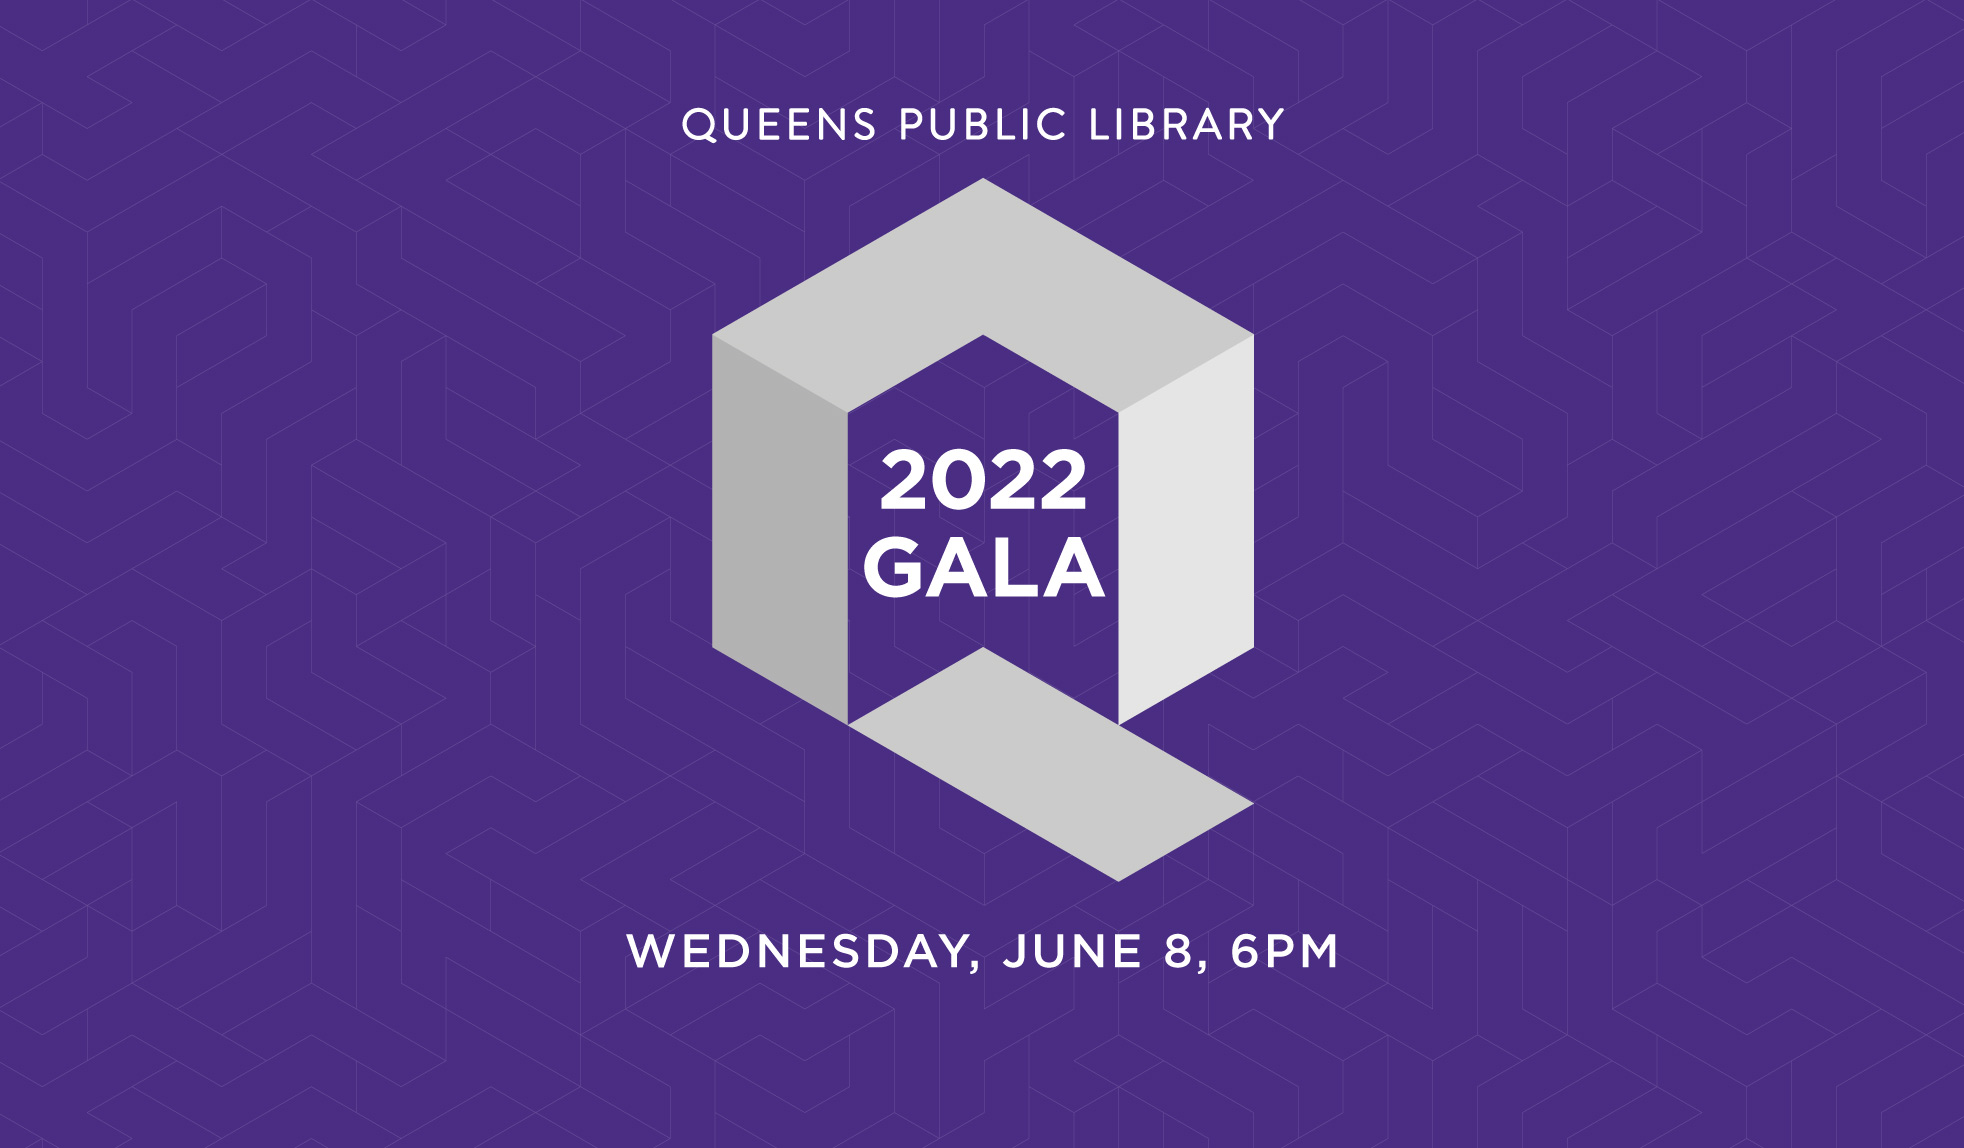 Join us as we celebrate our special guests: Jelani Cobb, Min Jin Lee, R.J. Palacio, and Gary Shteyngart!